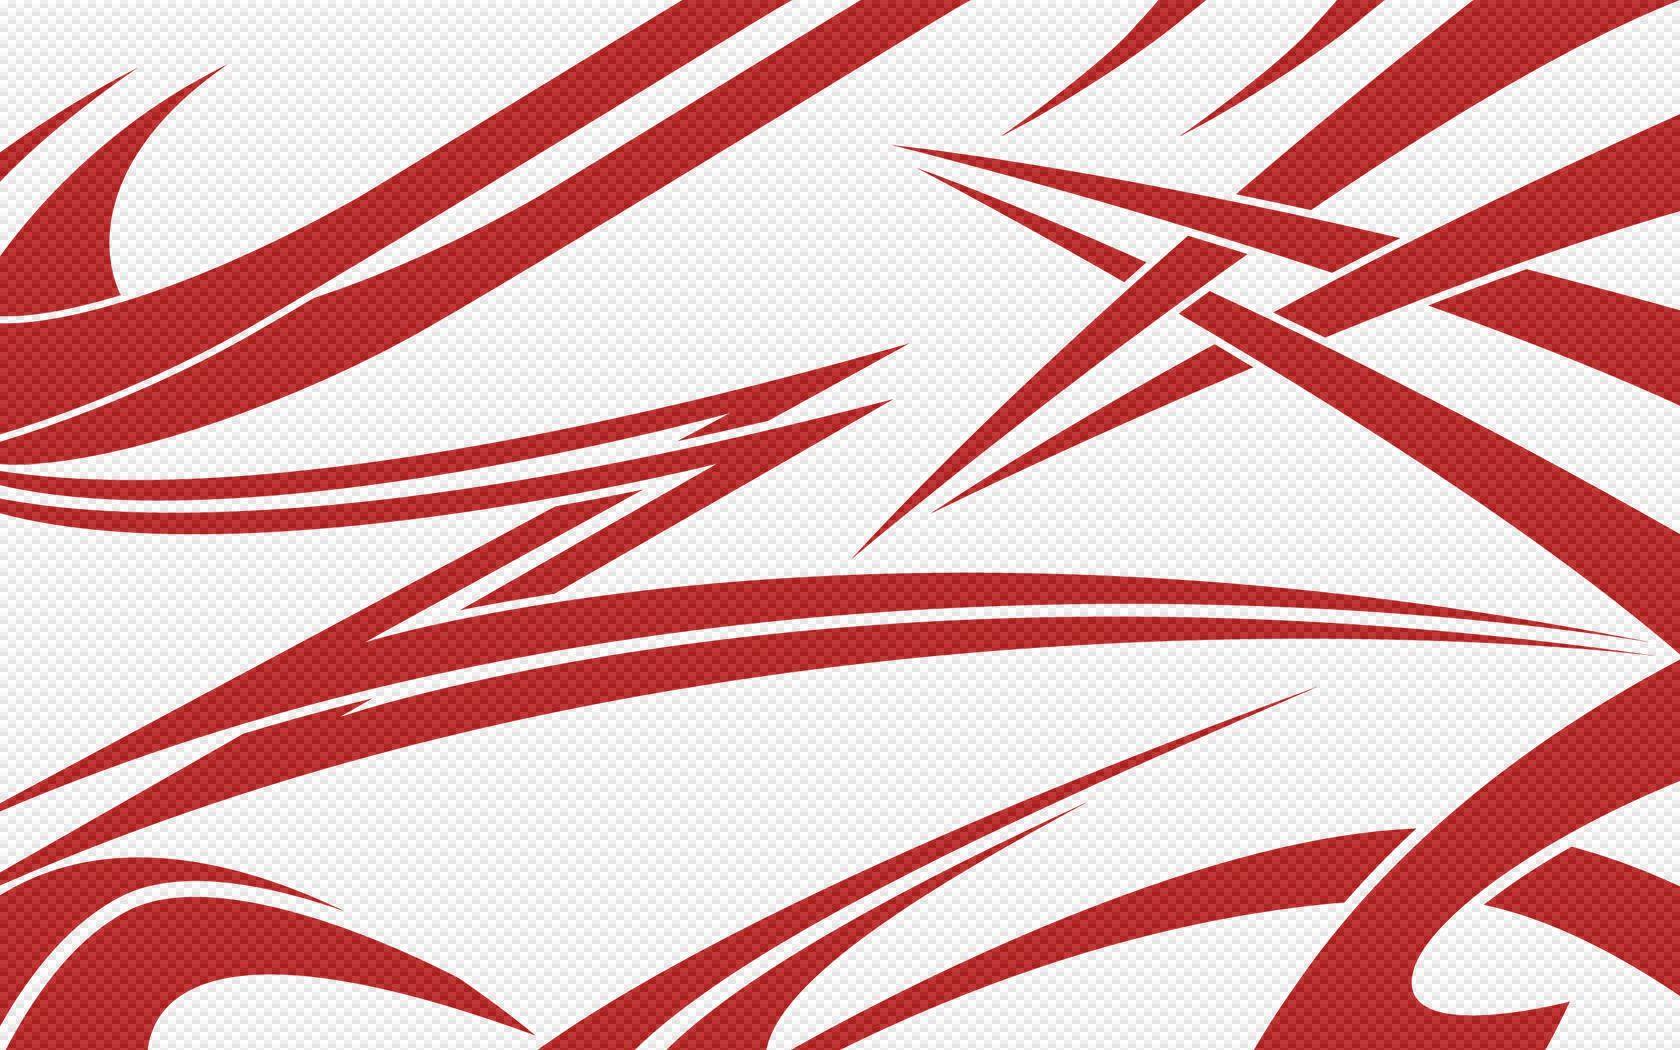 Red and White Y Logo - White & Red Carbon wallpaper. White & Red Carbon